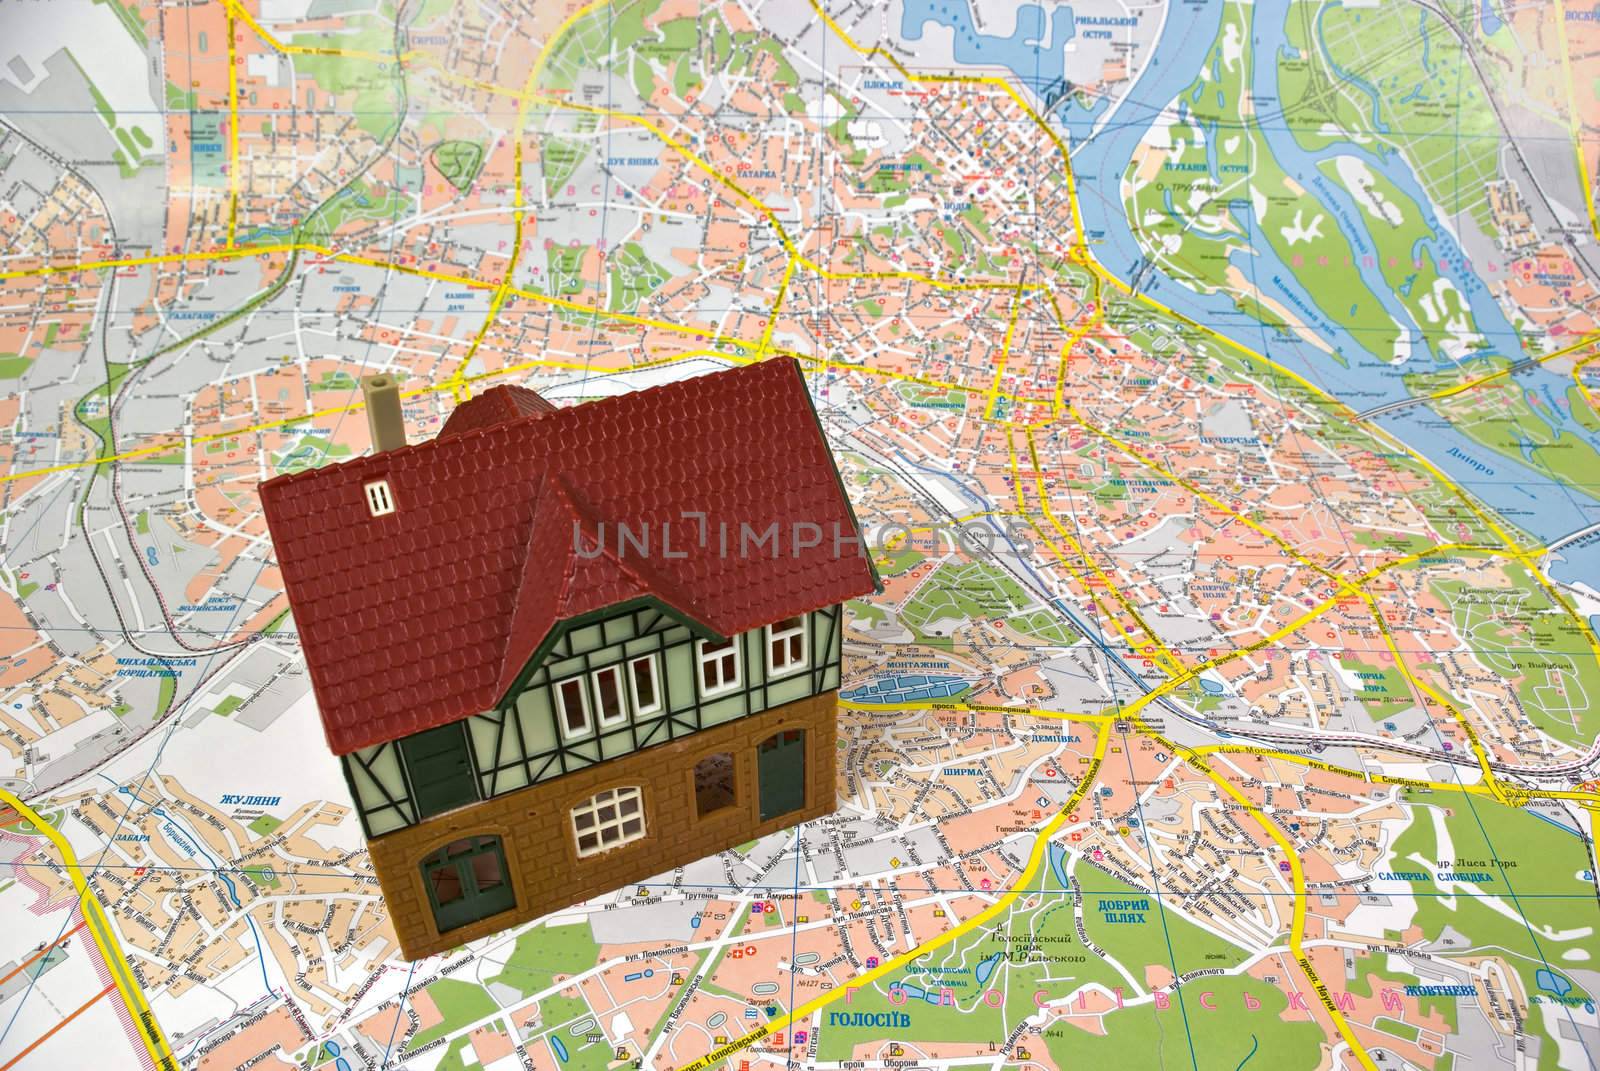 Model of a detached house on a city map